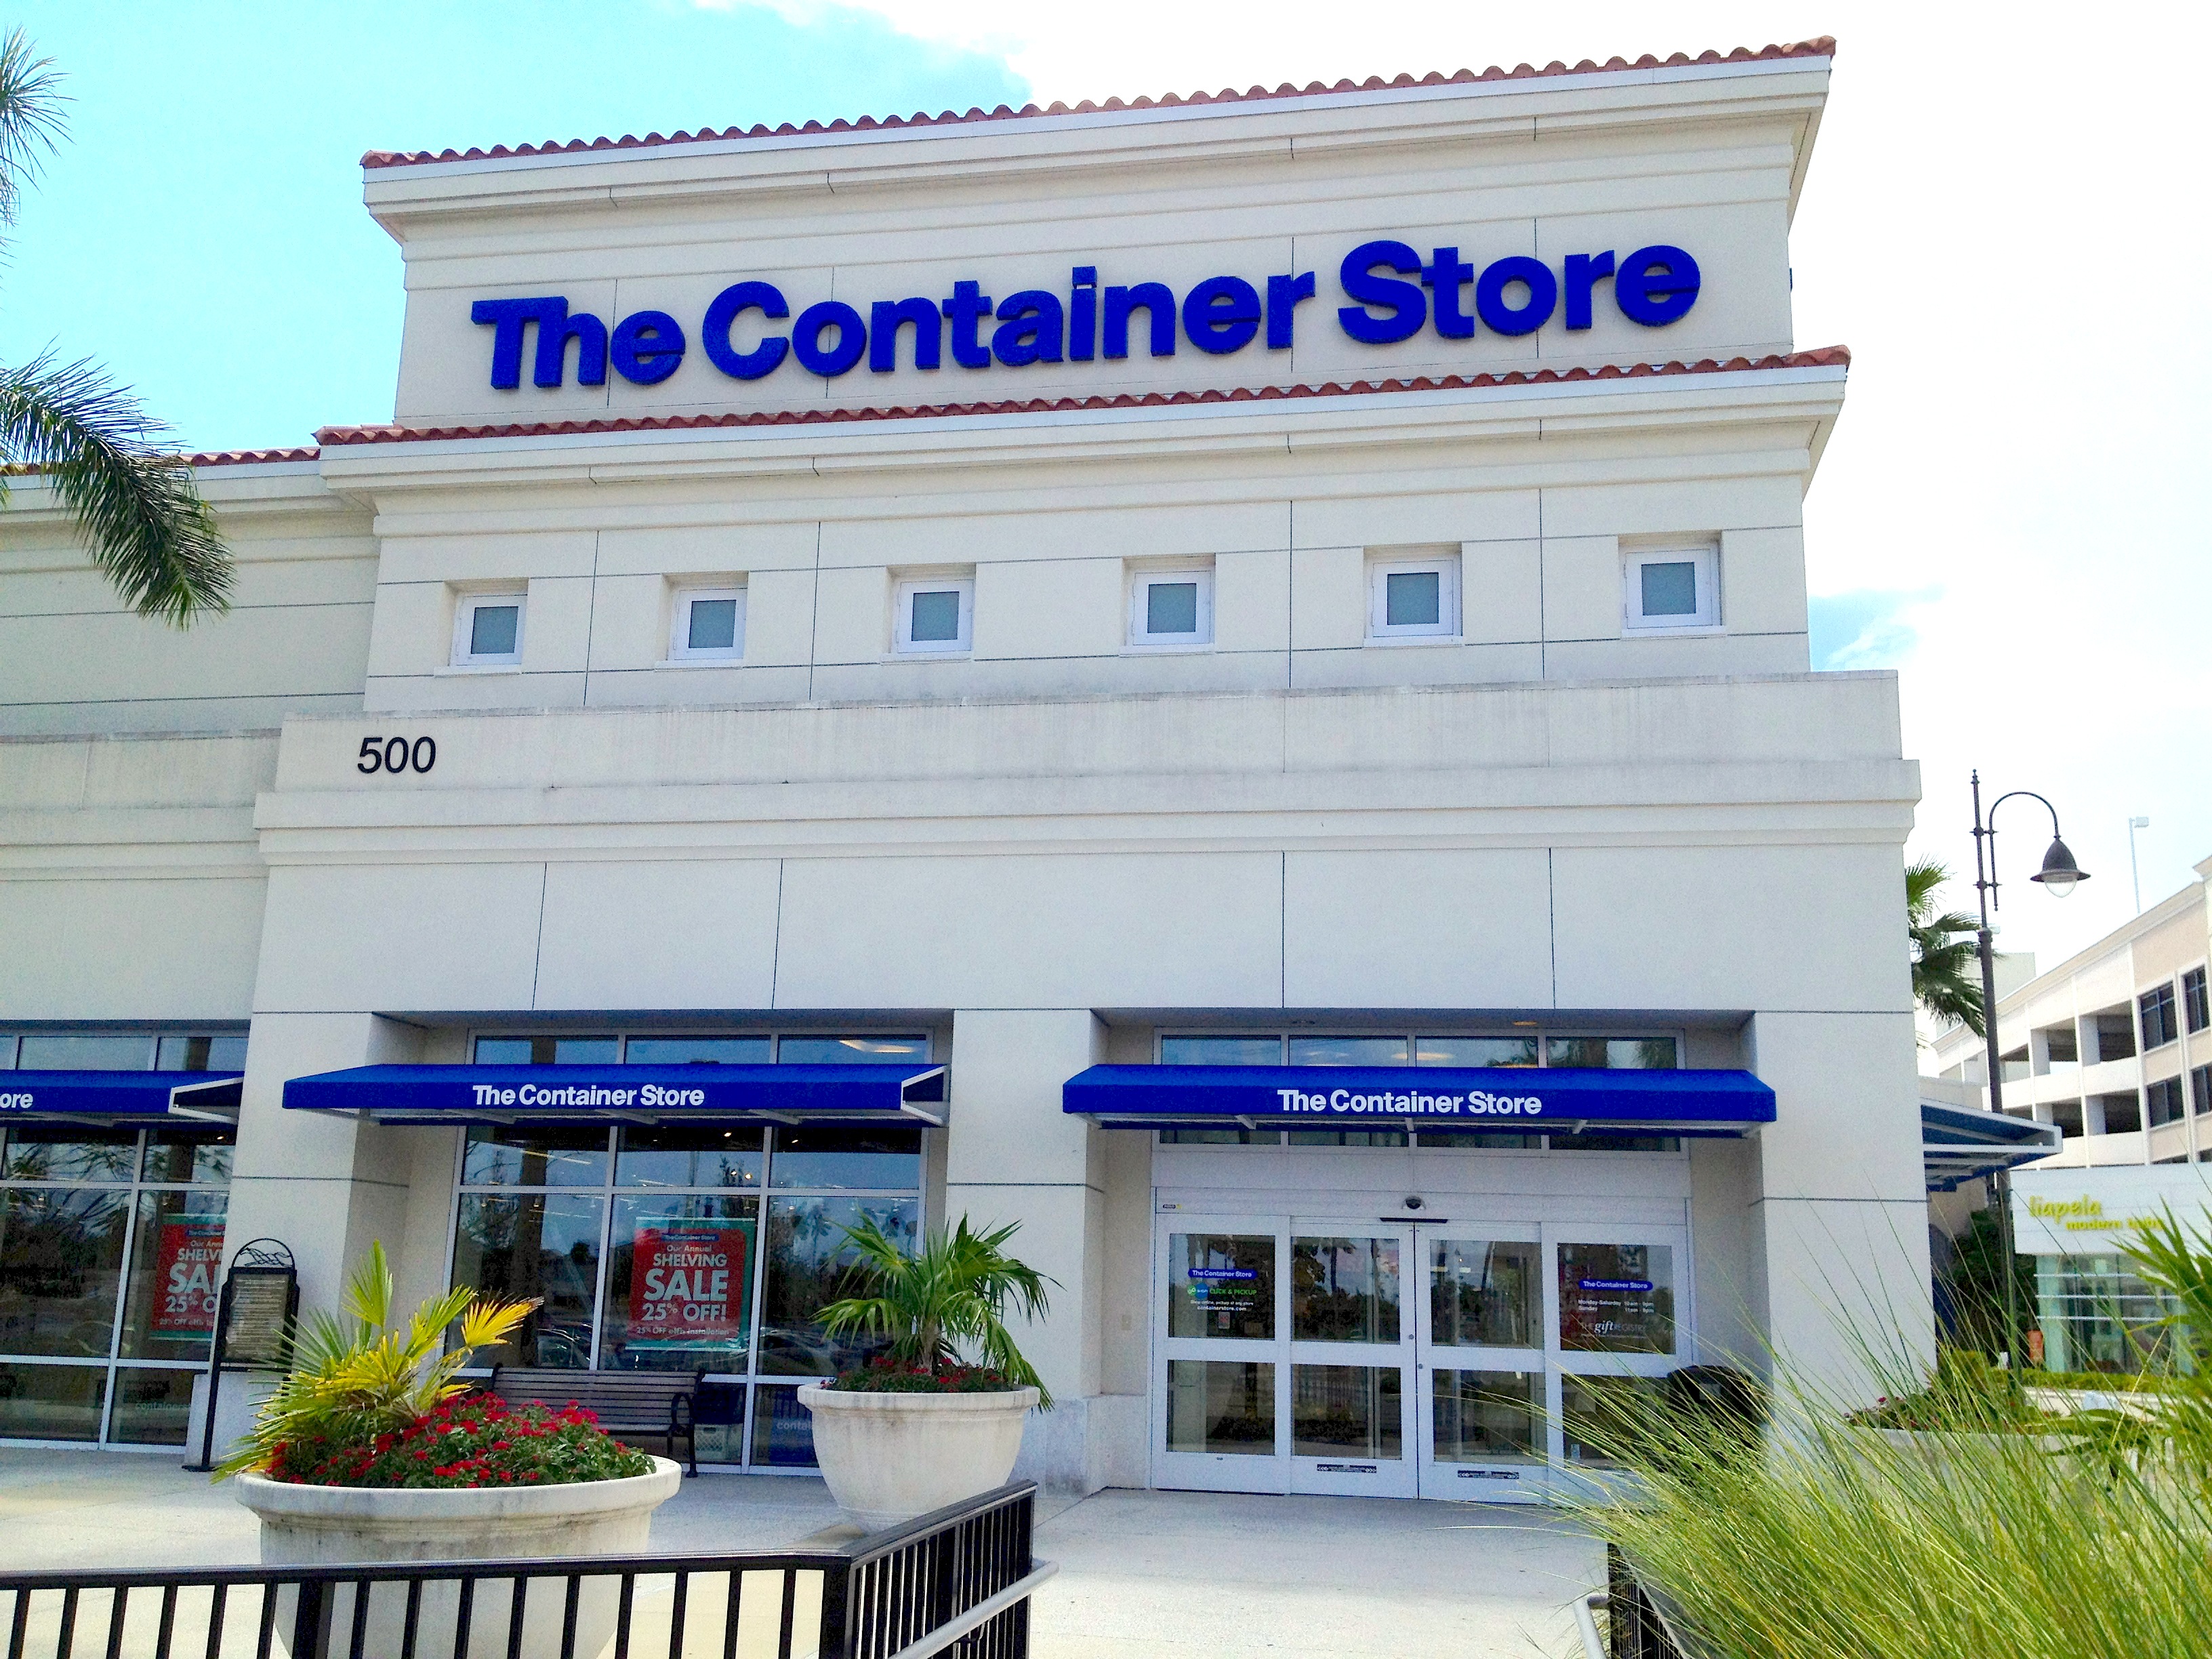 THE CONTAINER STORE